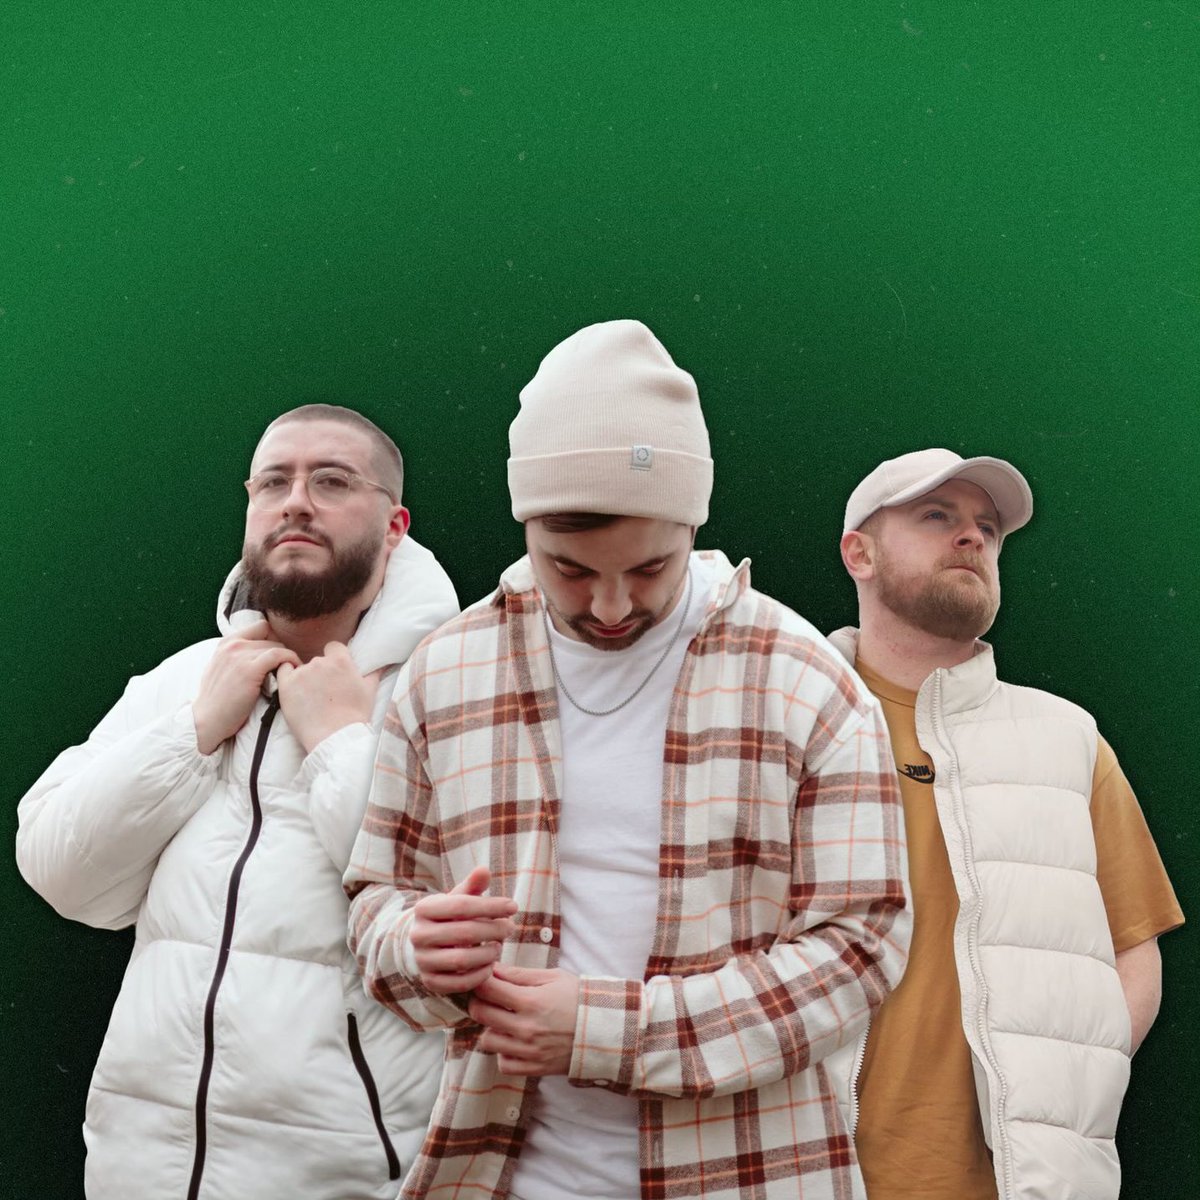 The first artist is @oddnumbersmusic Odd Numbers (Odhran O’Brien) is a music producer with a long list of credits in the Irish Hip-Hop space. Since his debut release in 2020, the Cavan native has produced for an ensemble of on-the-rise Irish artists, taking cues and inspiration-